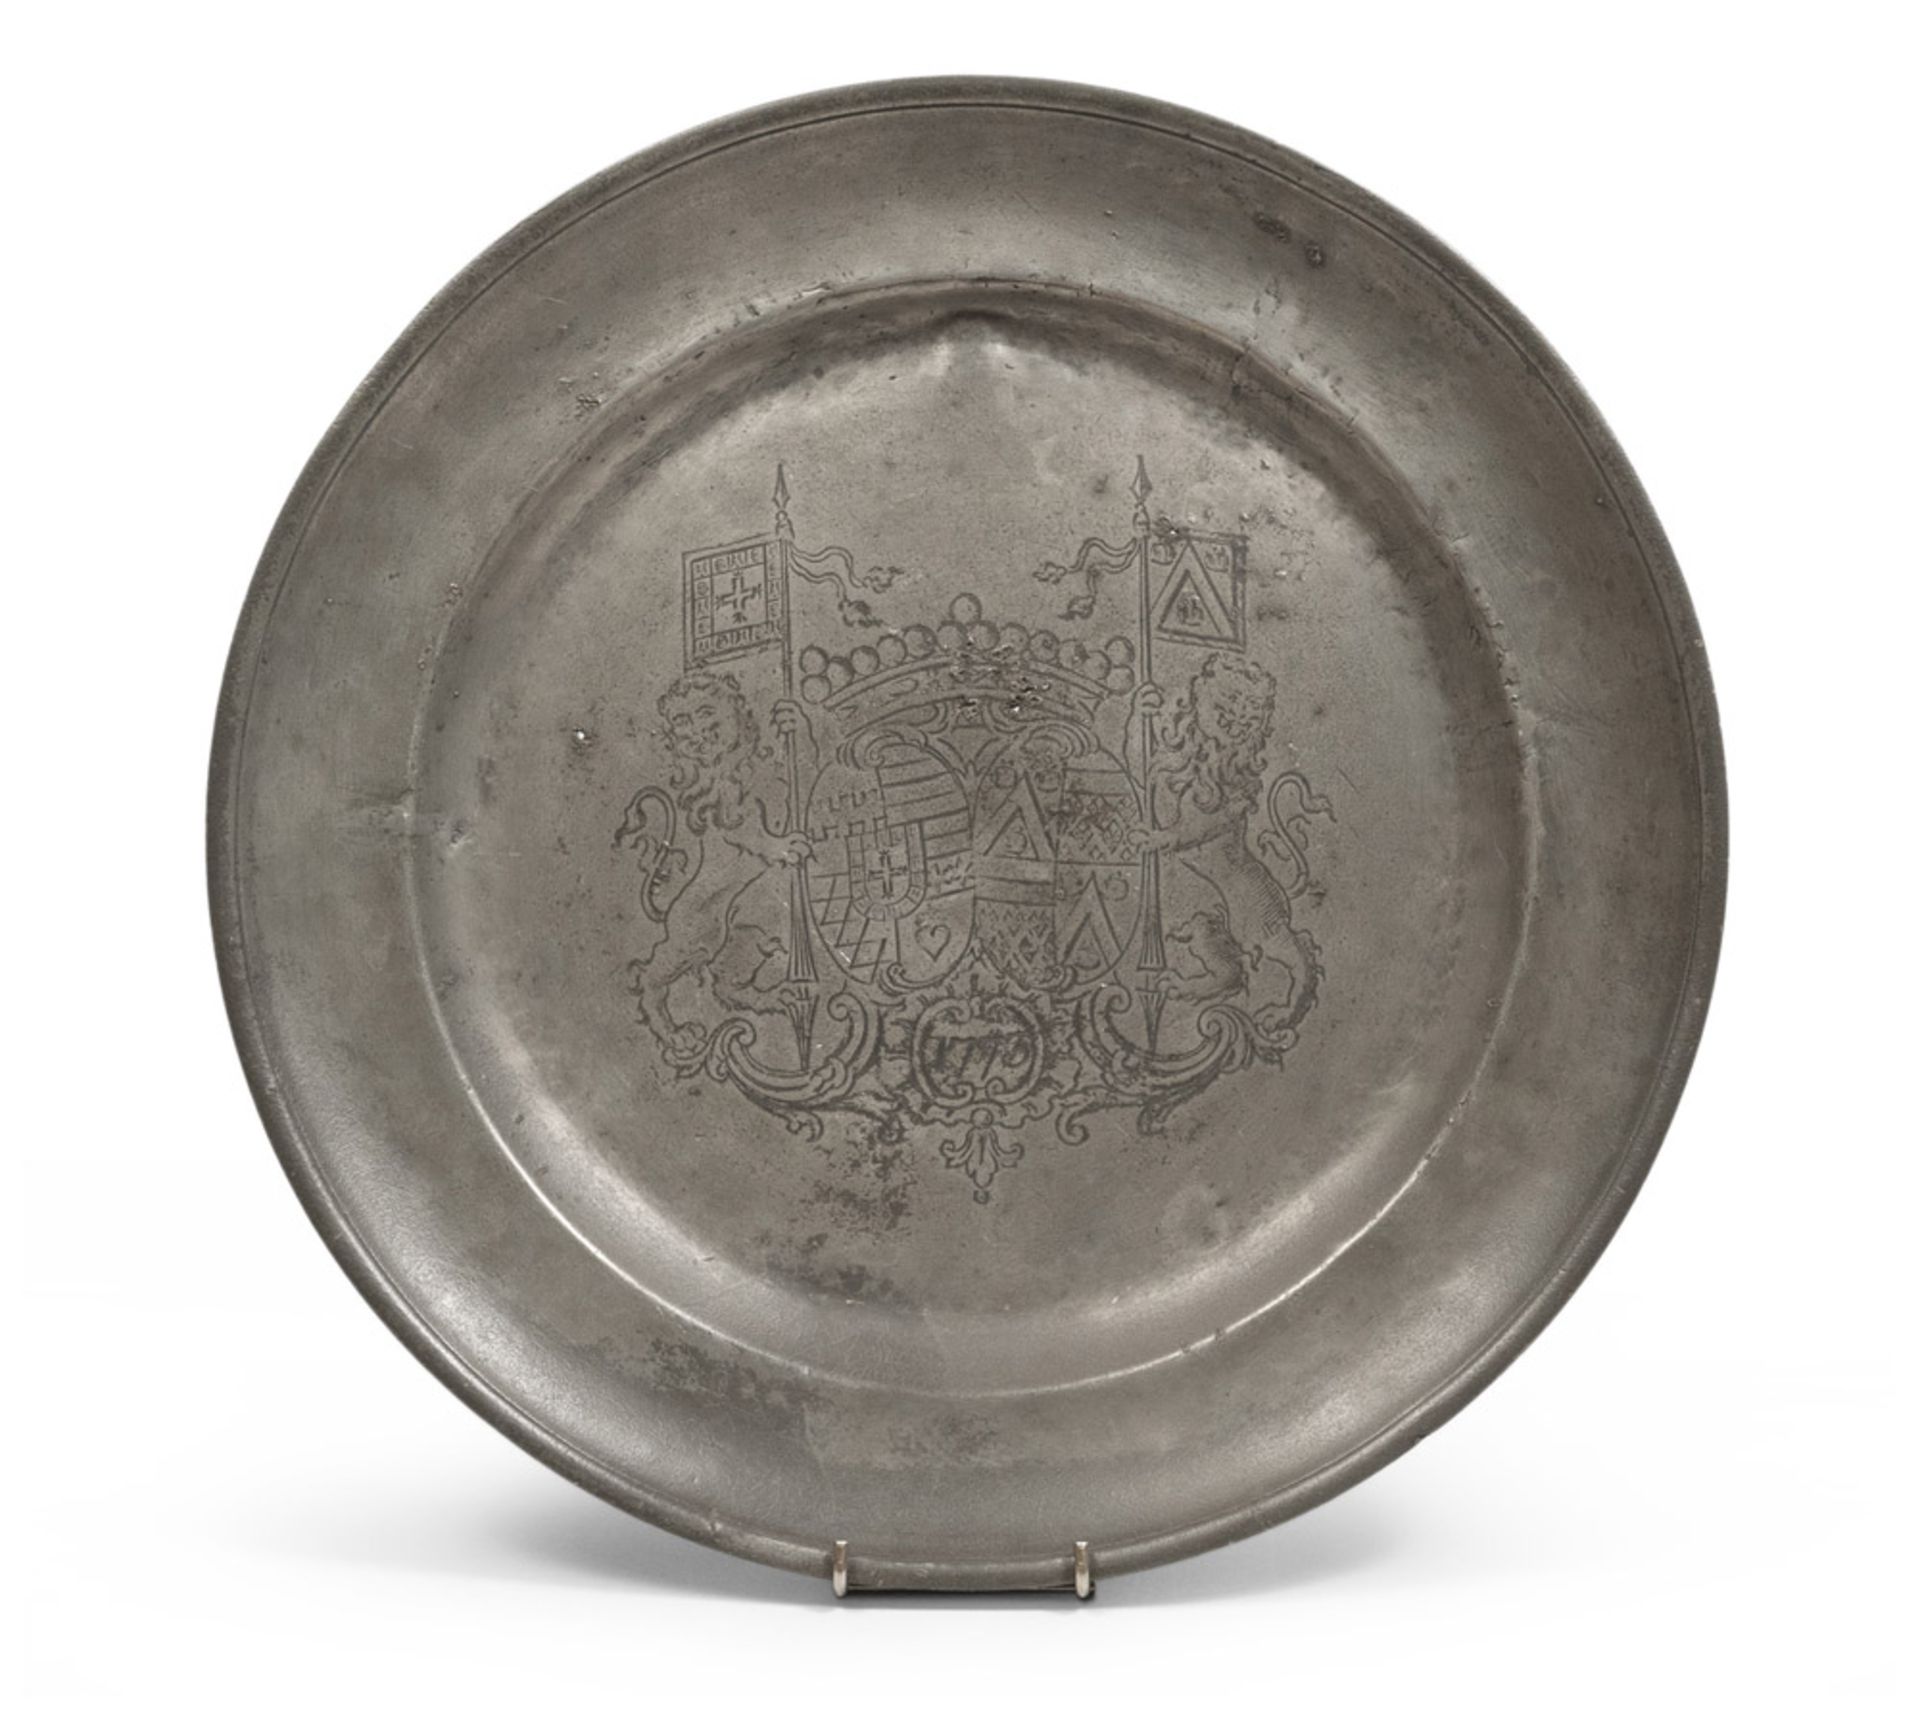 Pewter dish engraved to coat of arms and dated 1775, 18th century. Diameter cm. 38,5.PIATTO IN